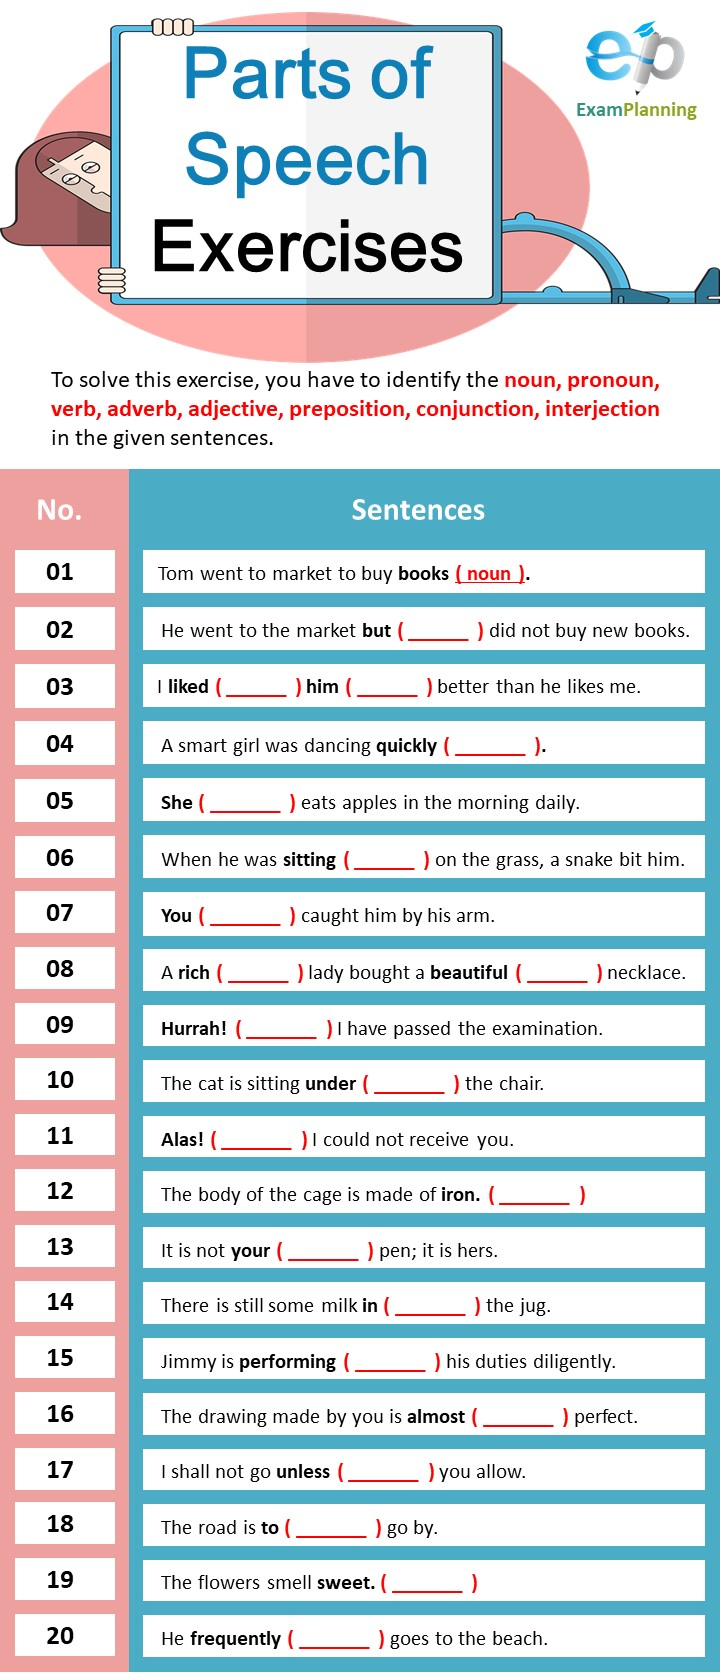 Parts Of Speech Exercises ExamPlanning